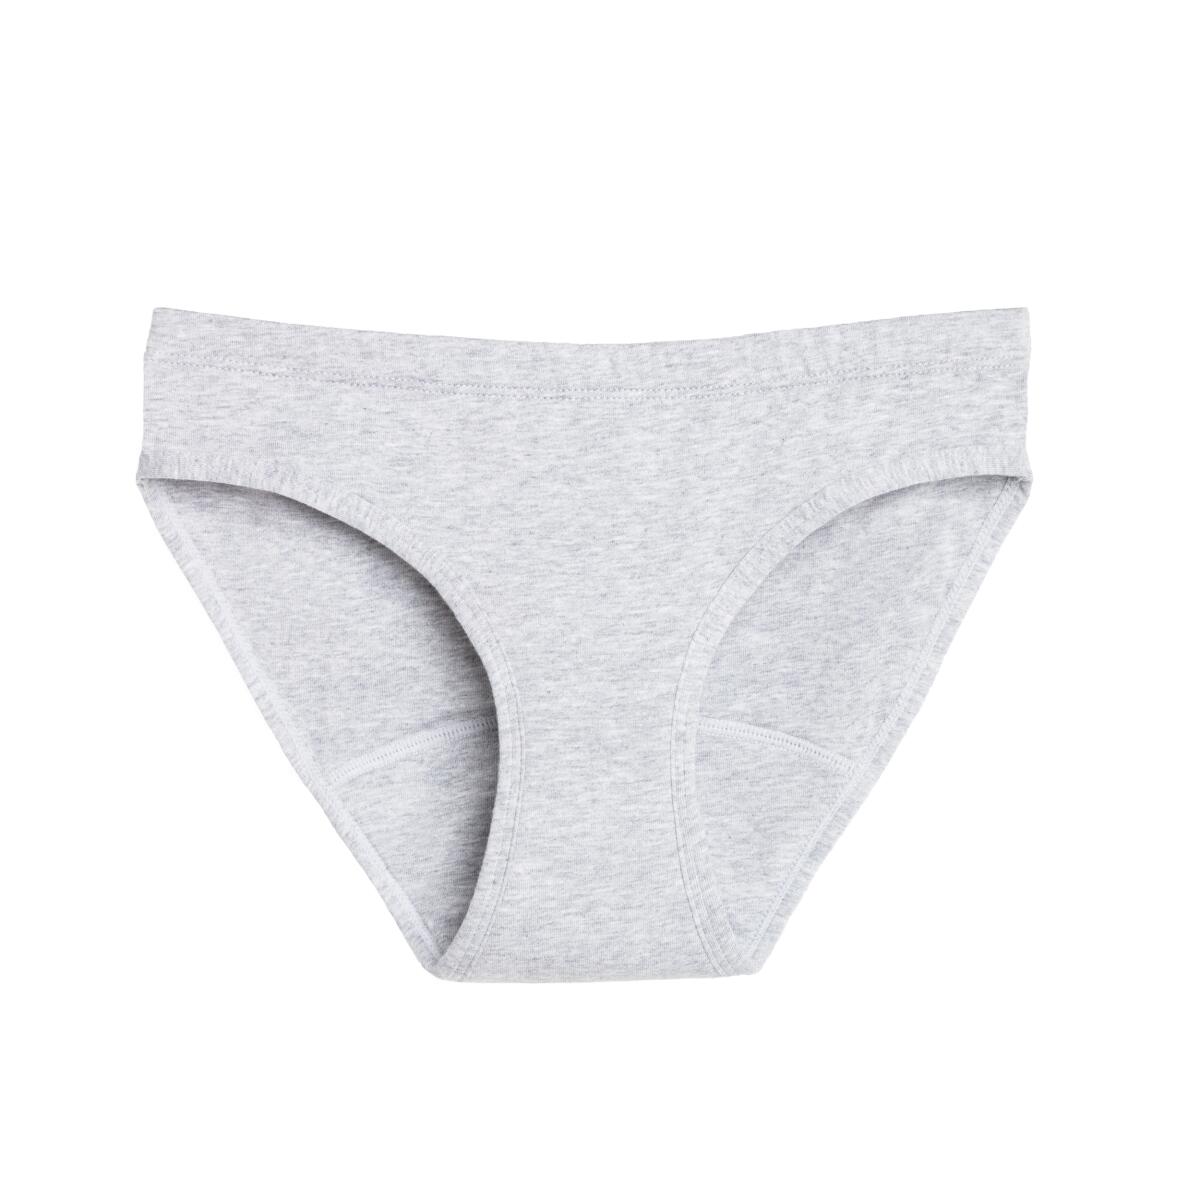 Period. by The Period Company. The Boxer Period. in Organic Cotton